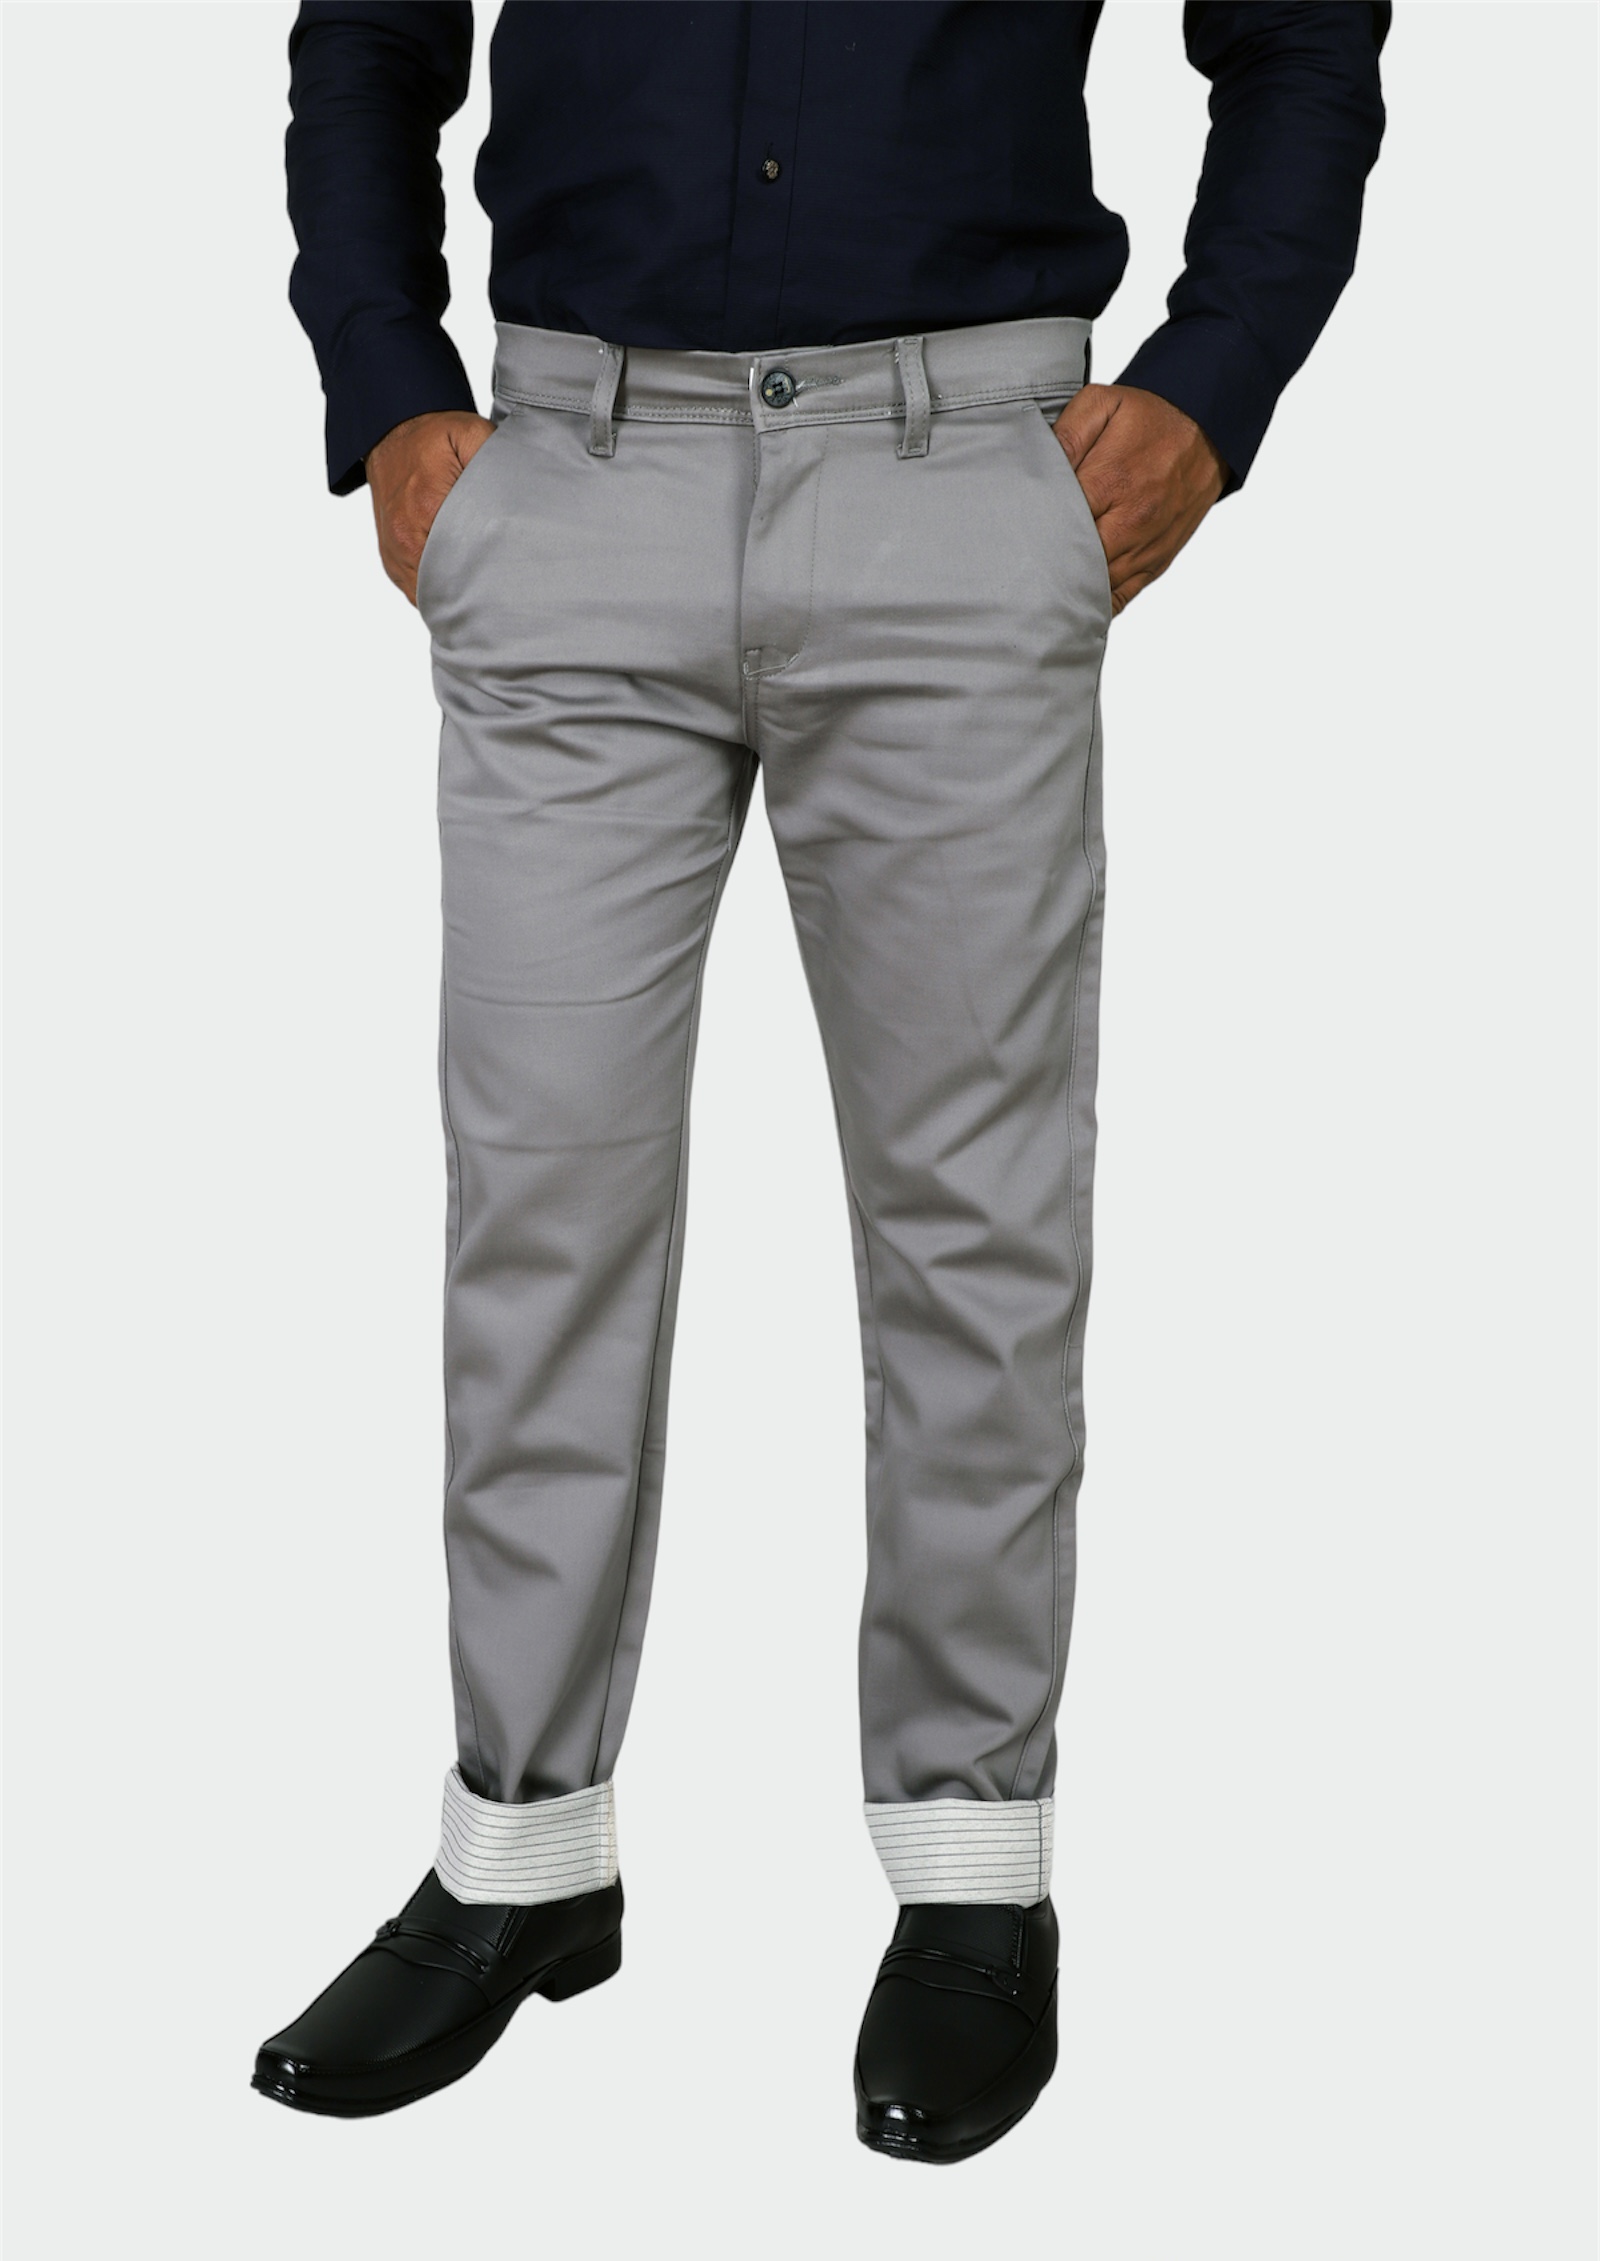 Regular Bell Bottom Grey Jeans, Button at Rs 360/piece in New Delhi | ID:  26189233712